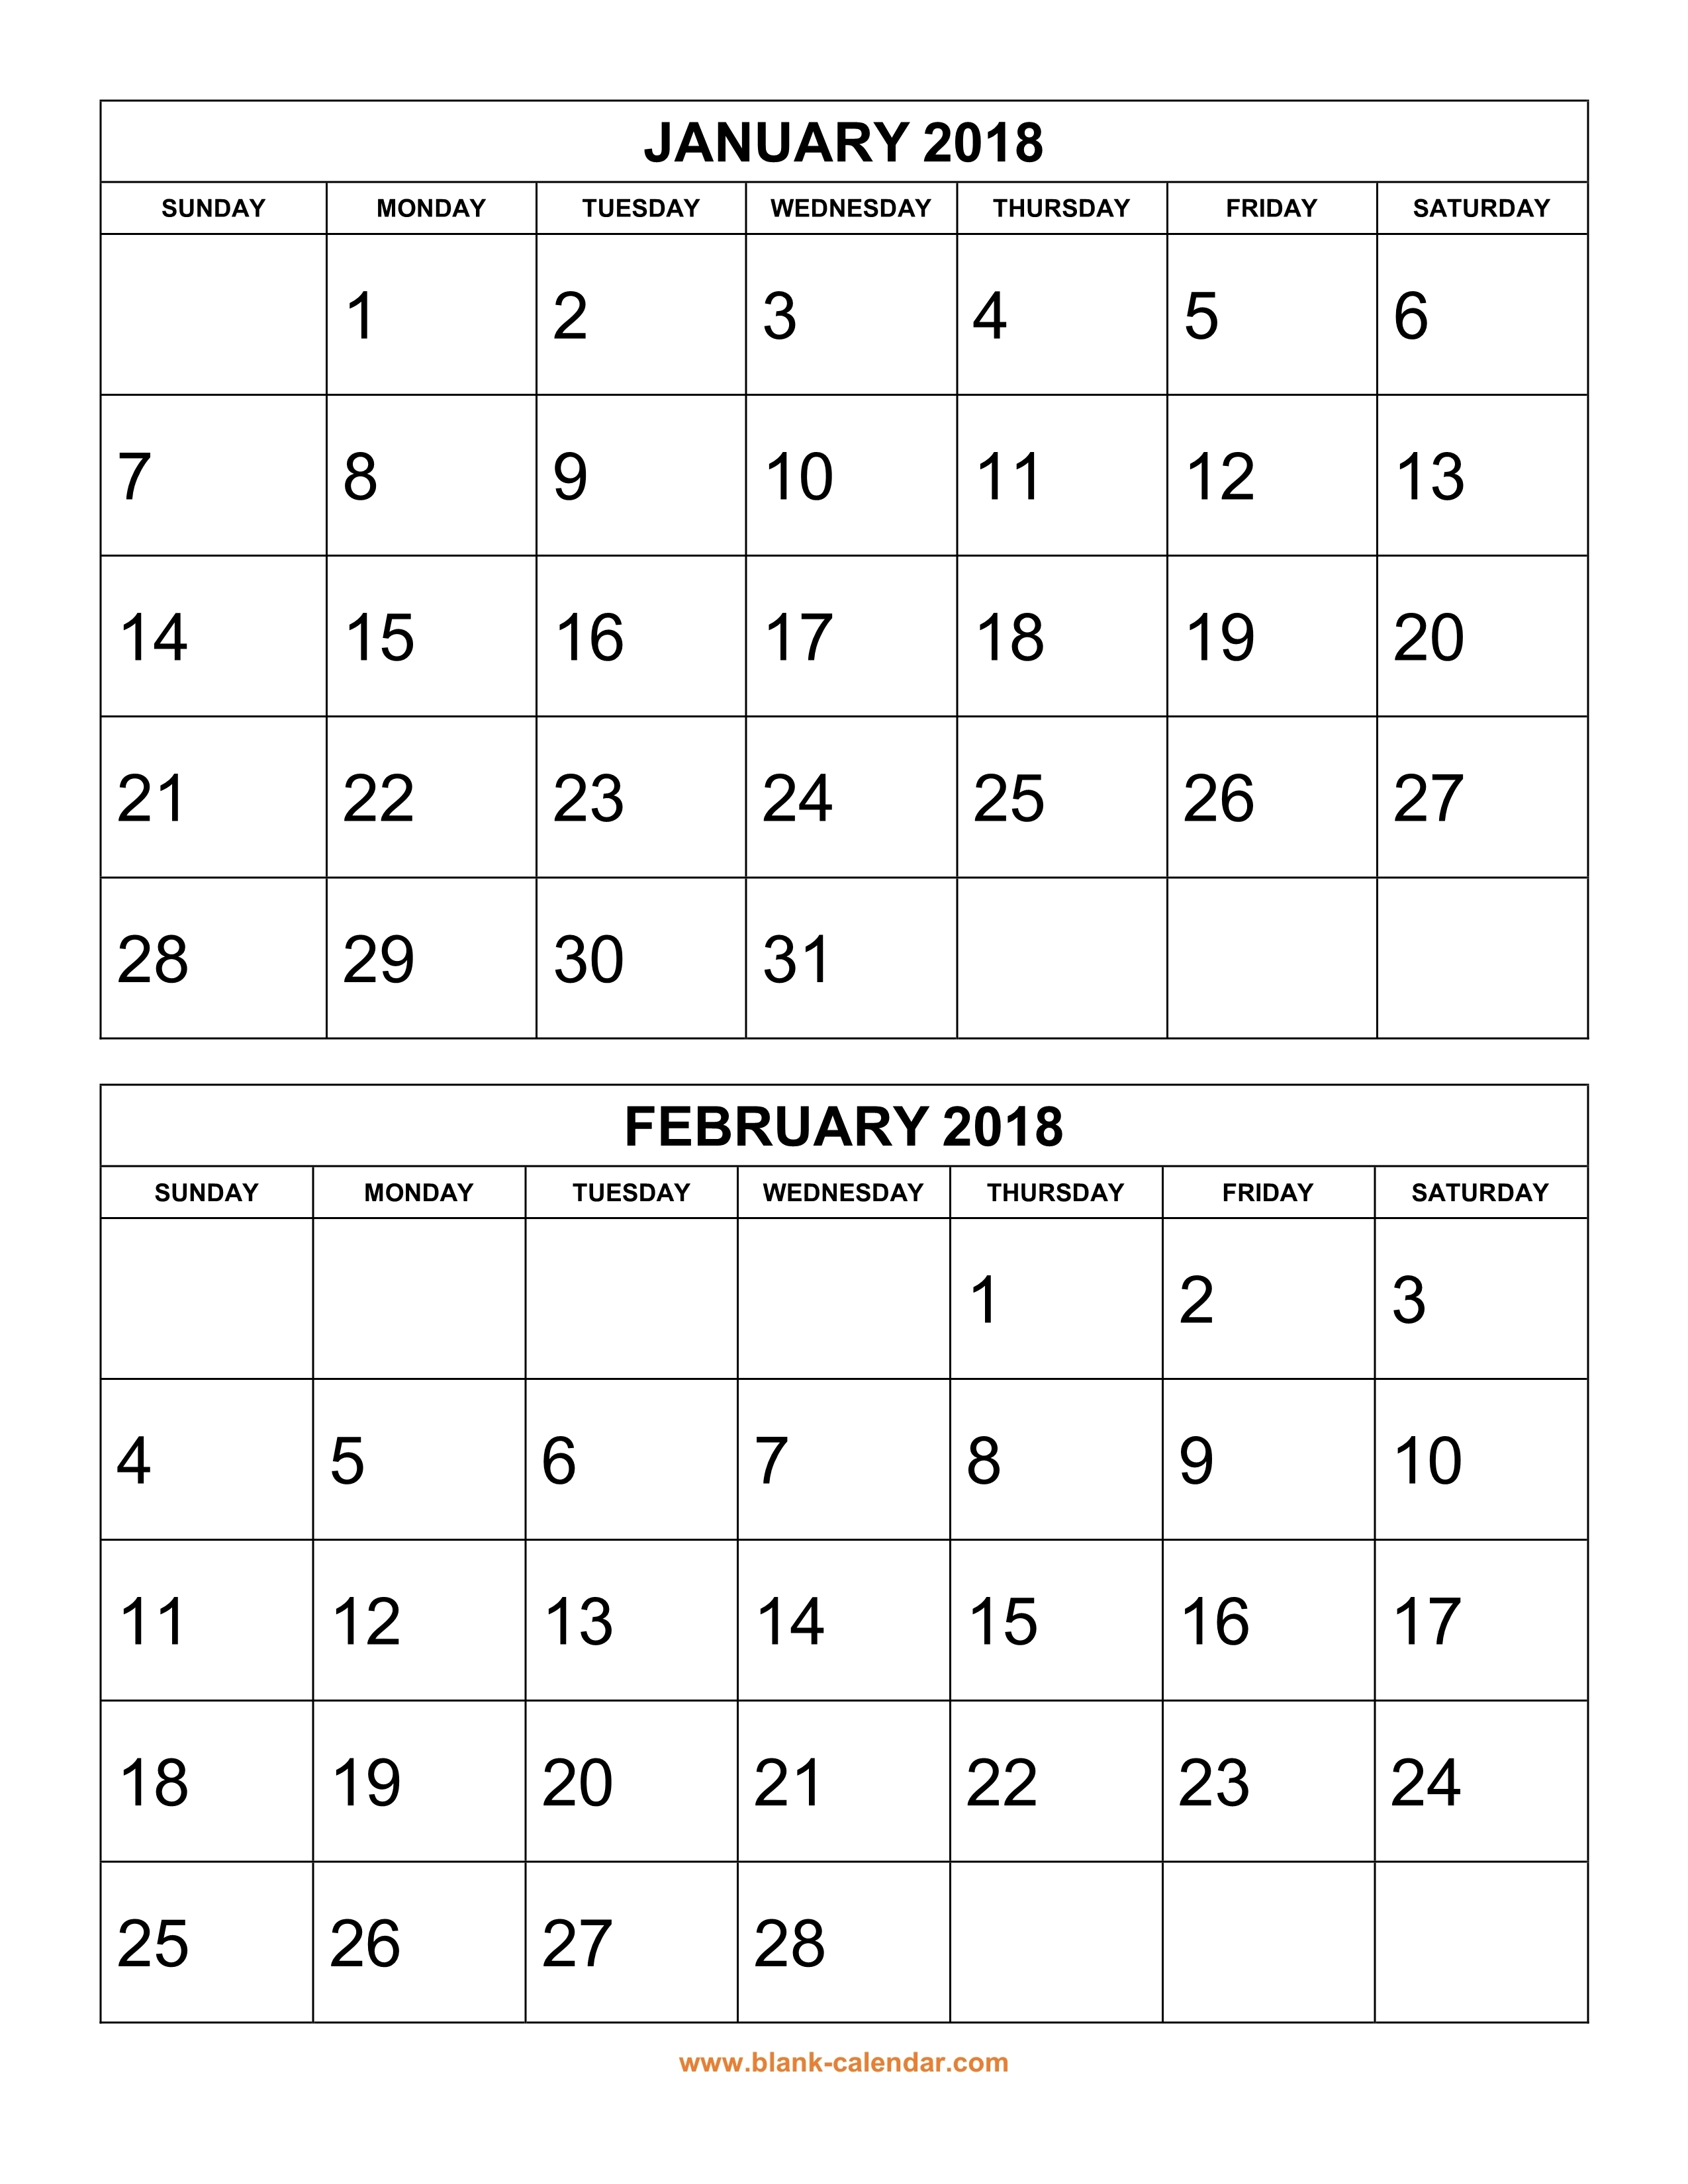 Monthly Calendar 2 Page To Print | Calendar Printing Example